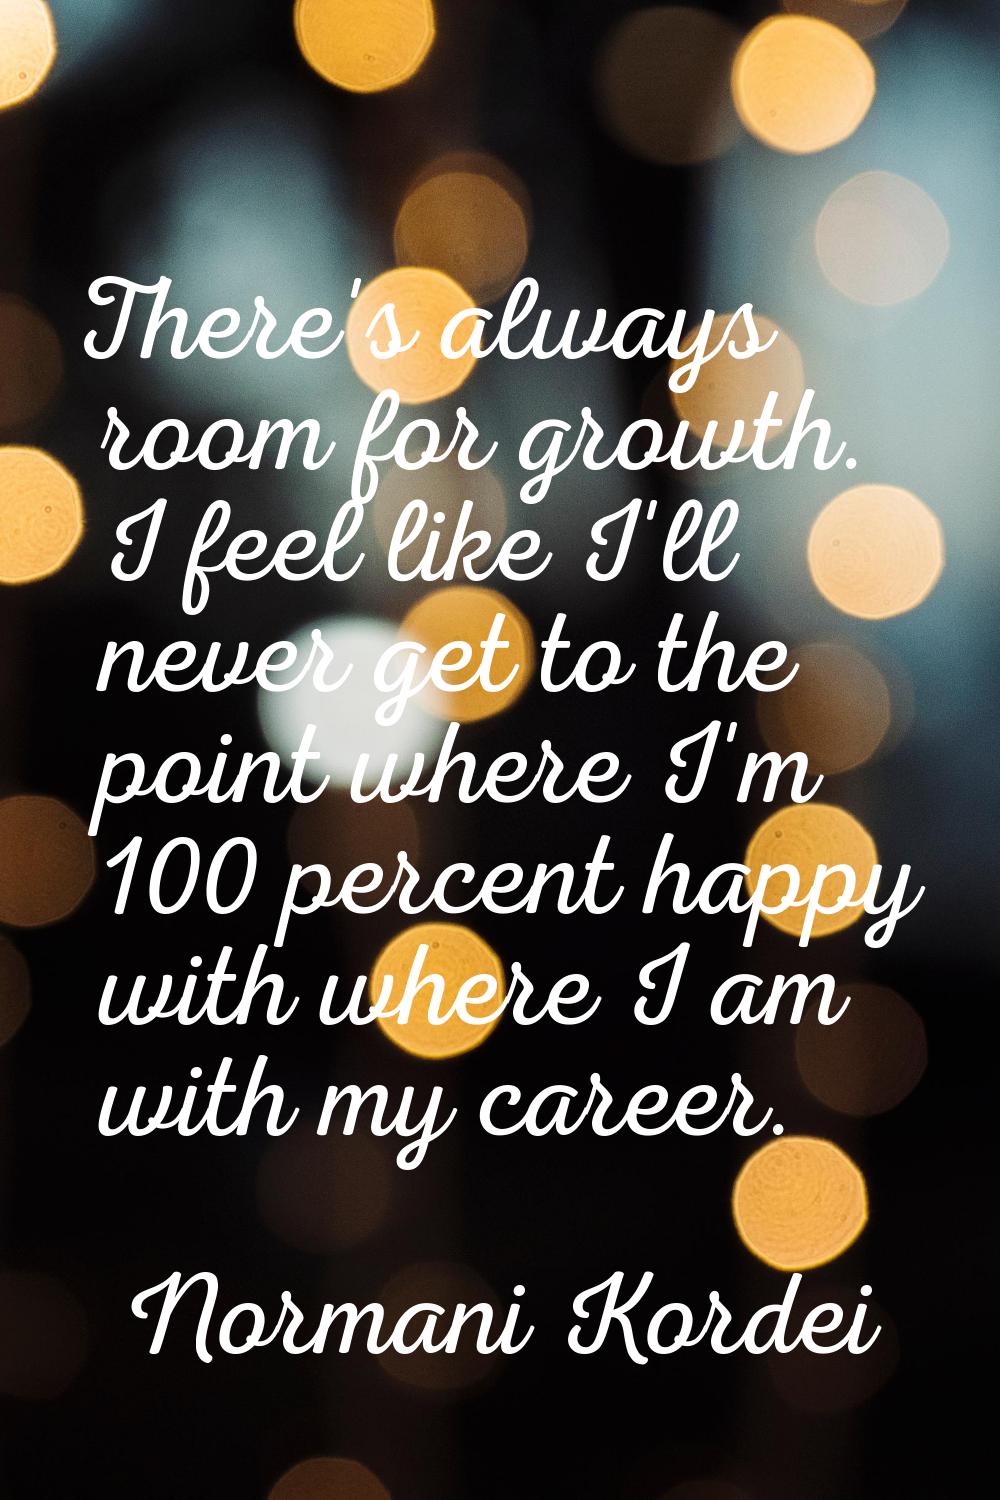 There's always room for growth. I feel like I'll never get to the point where I'm 100 percent happy